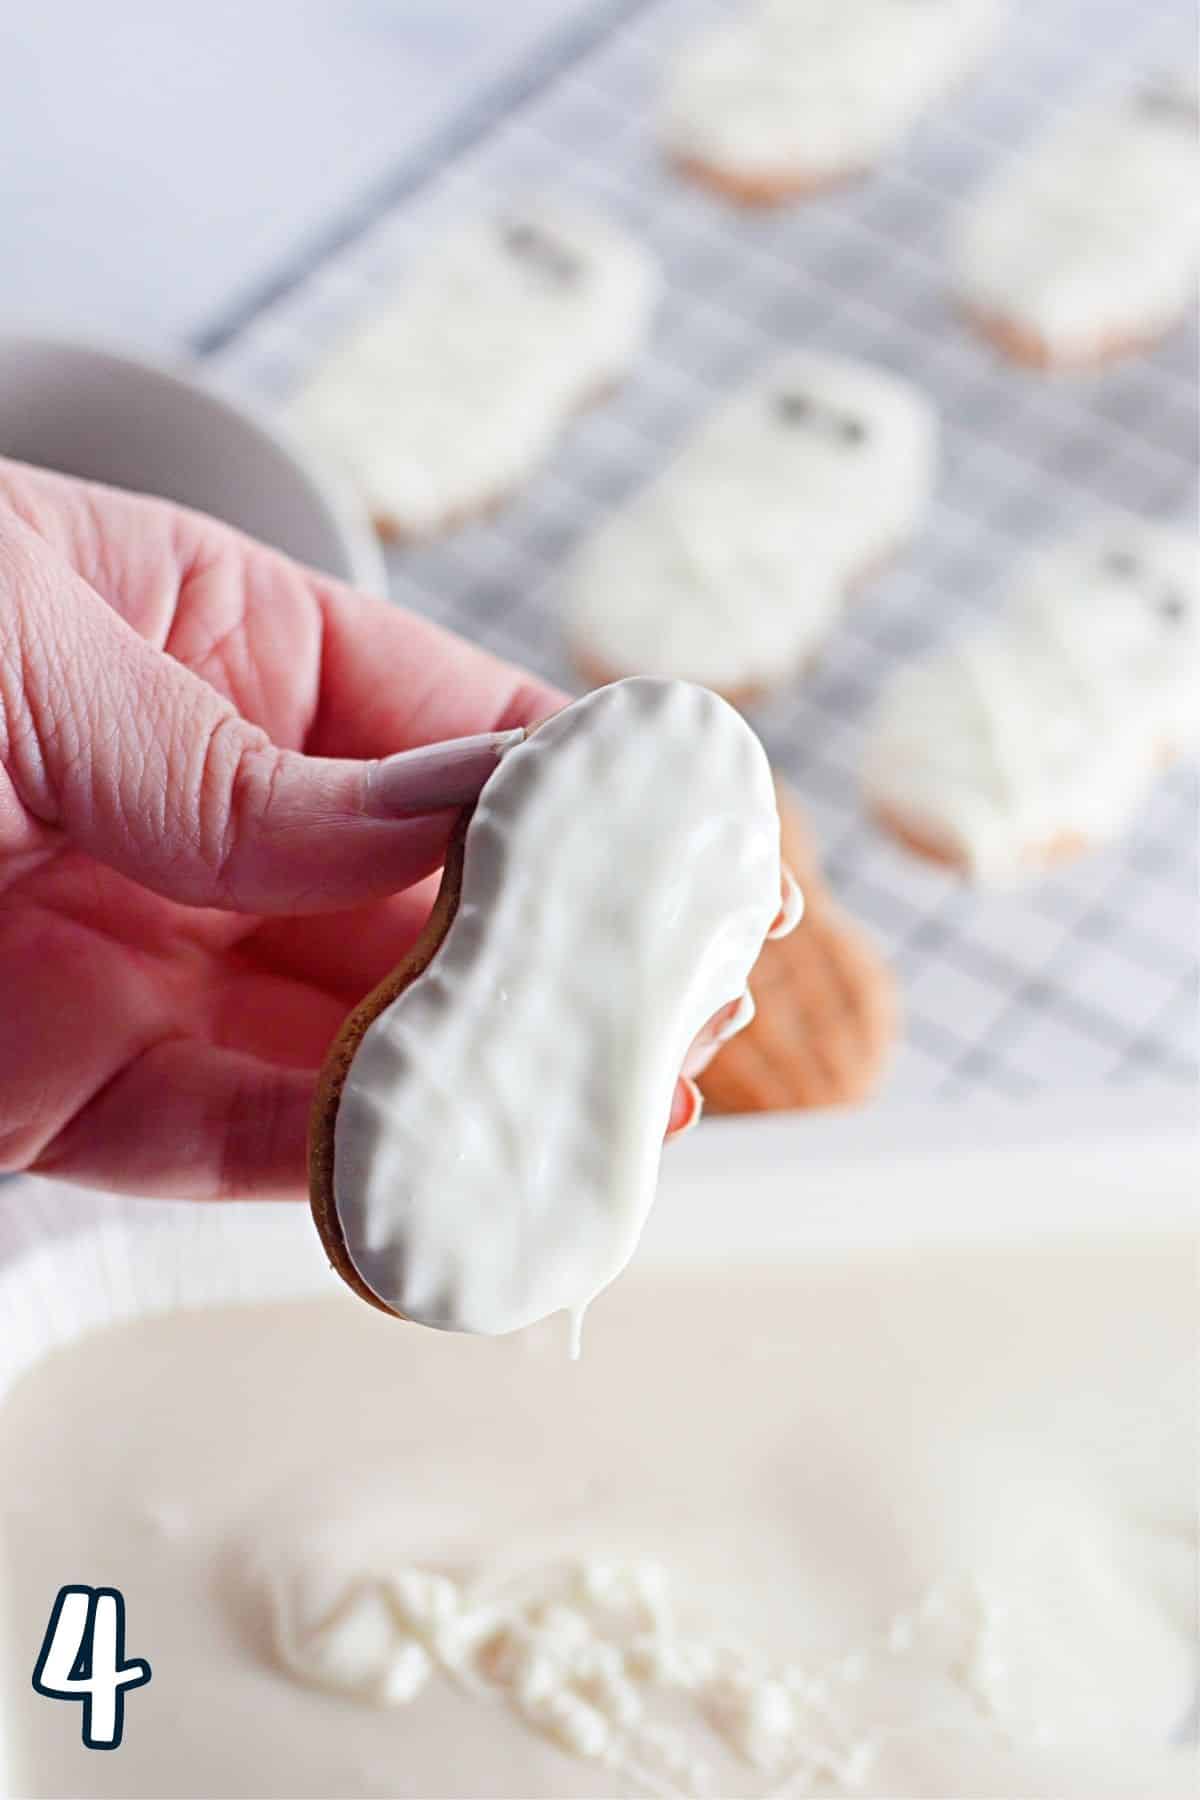 A Nutter Butter Cookies that was dipped in white melting chocolate. 